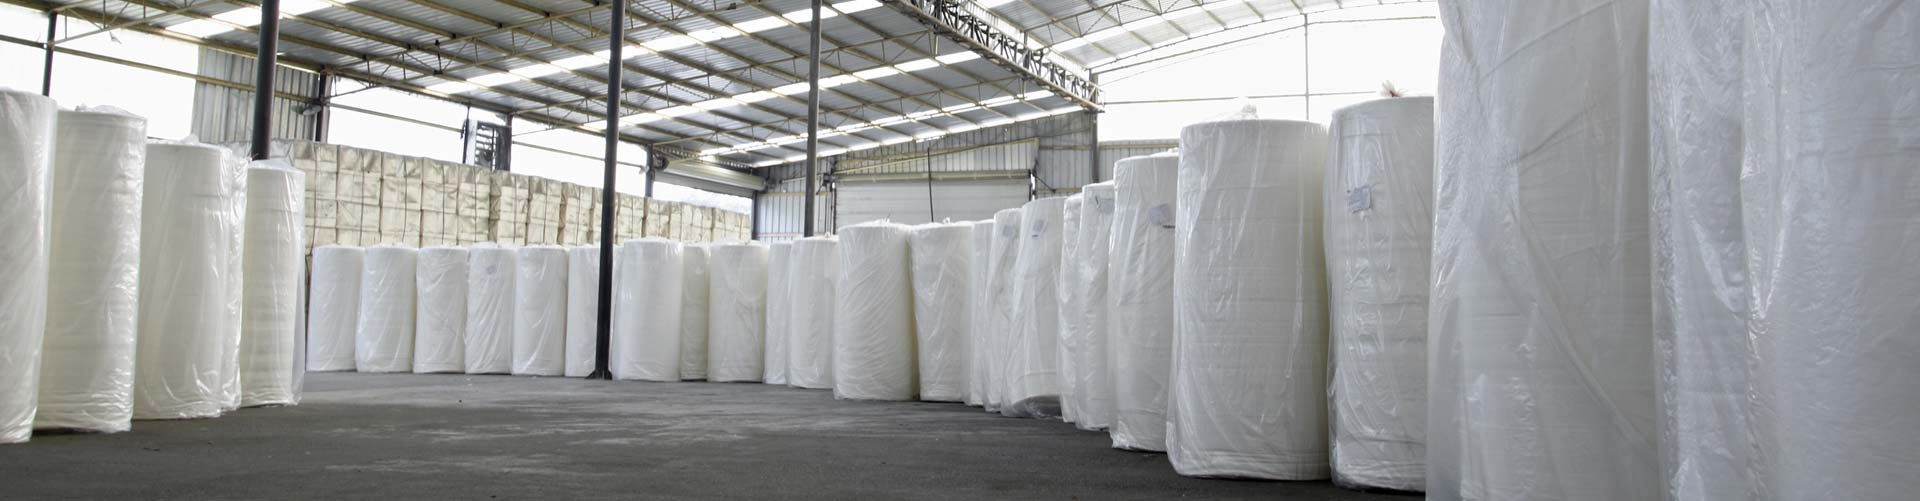 poly film suppliers